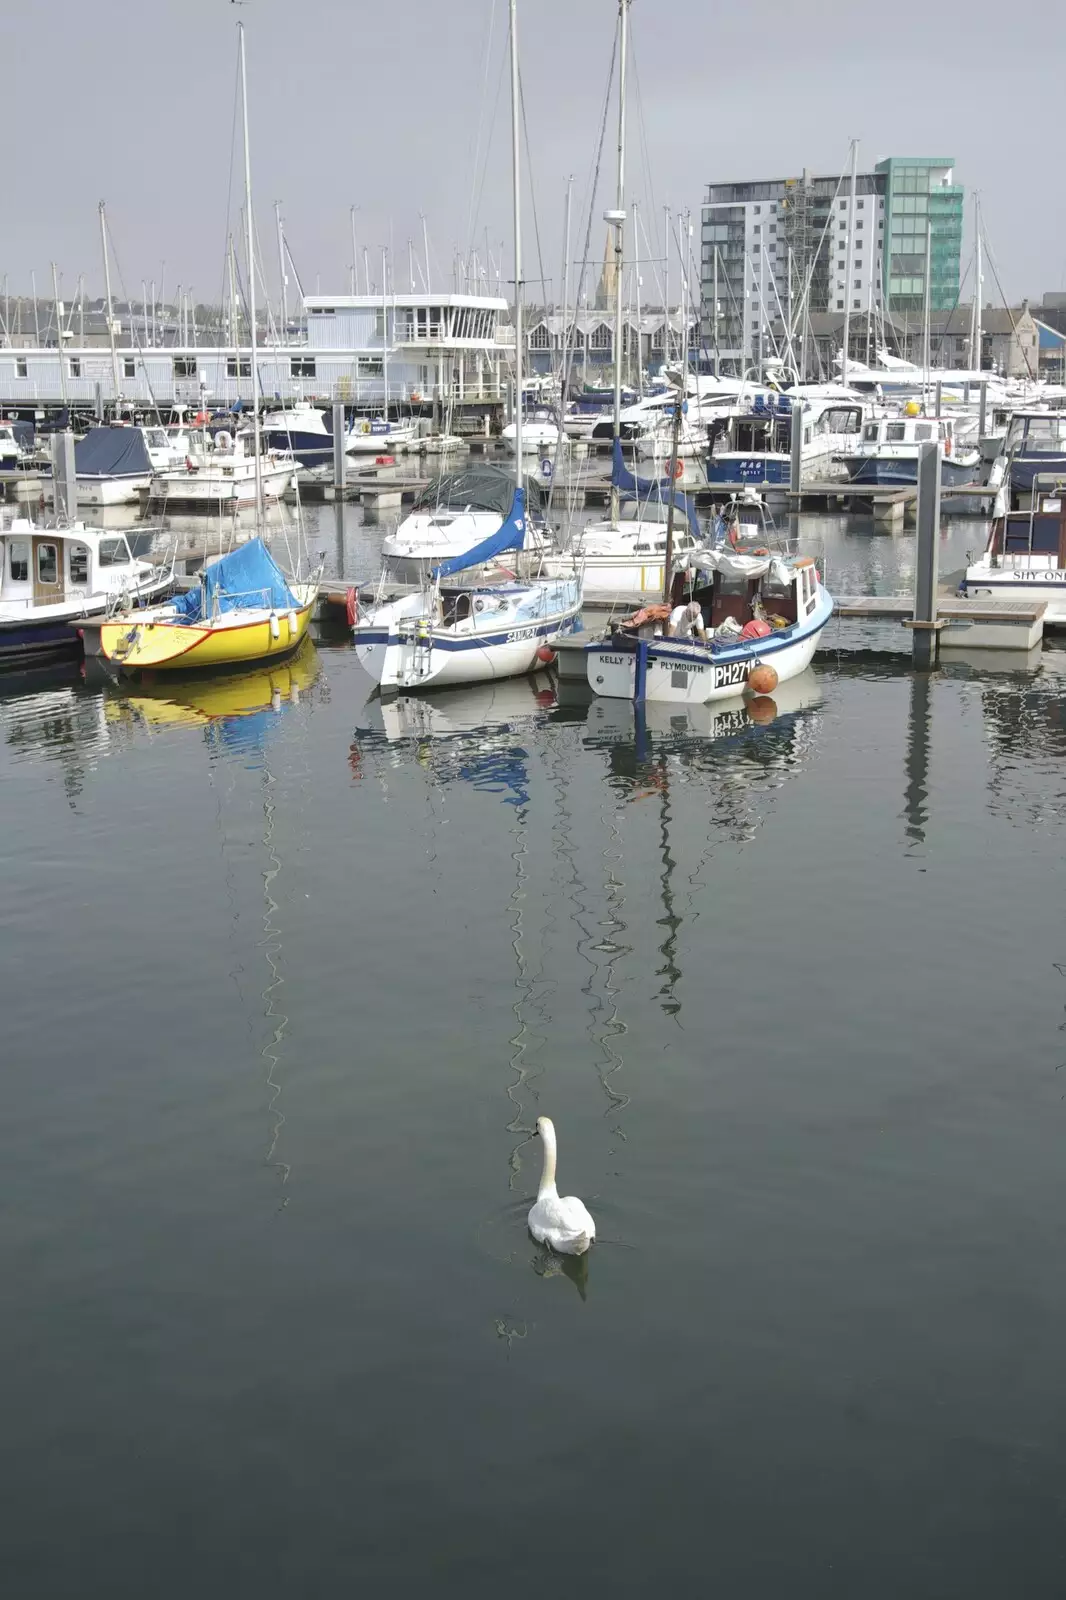 A lone swan floats about, from A Trip to The Barbican, Plymouth, Devon - 6th April 2007